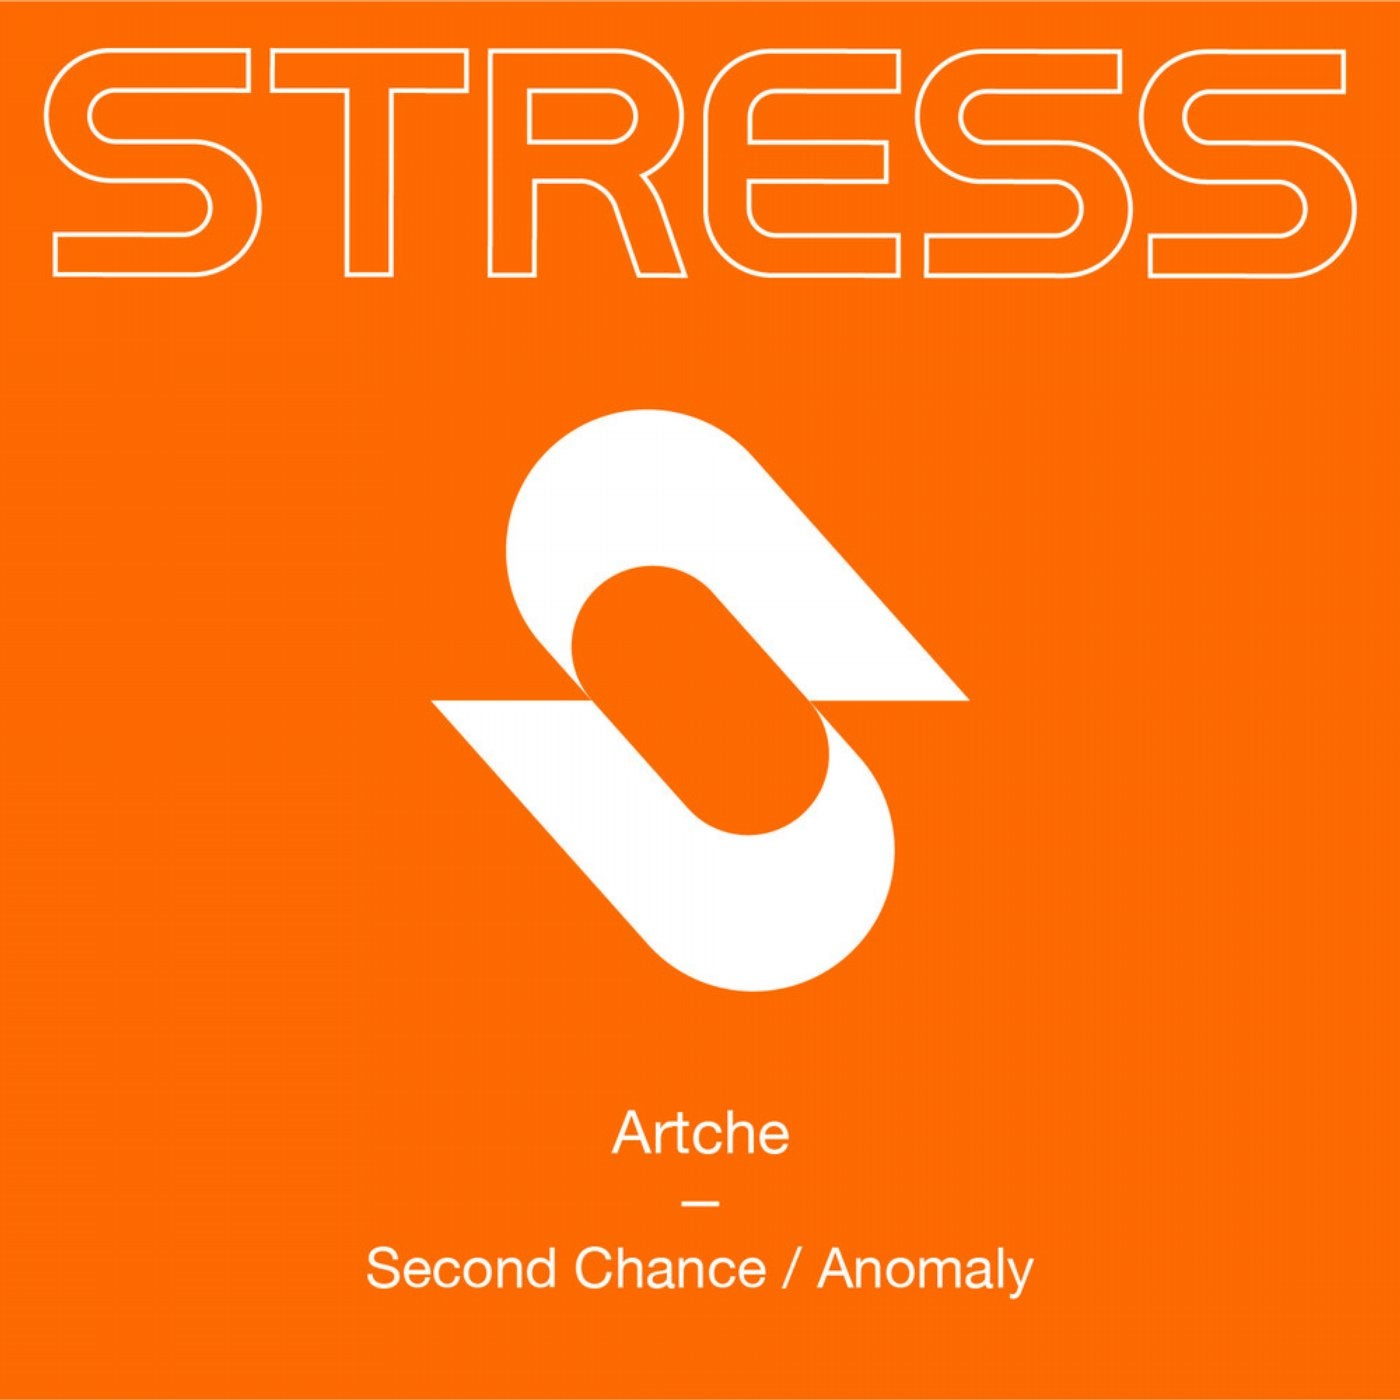 Second Chance / Anomaly